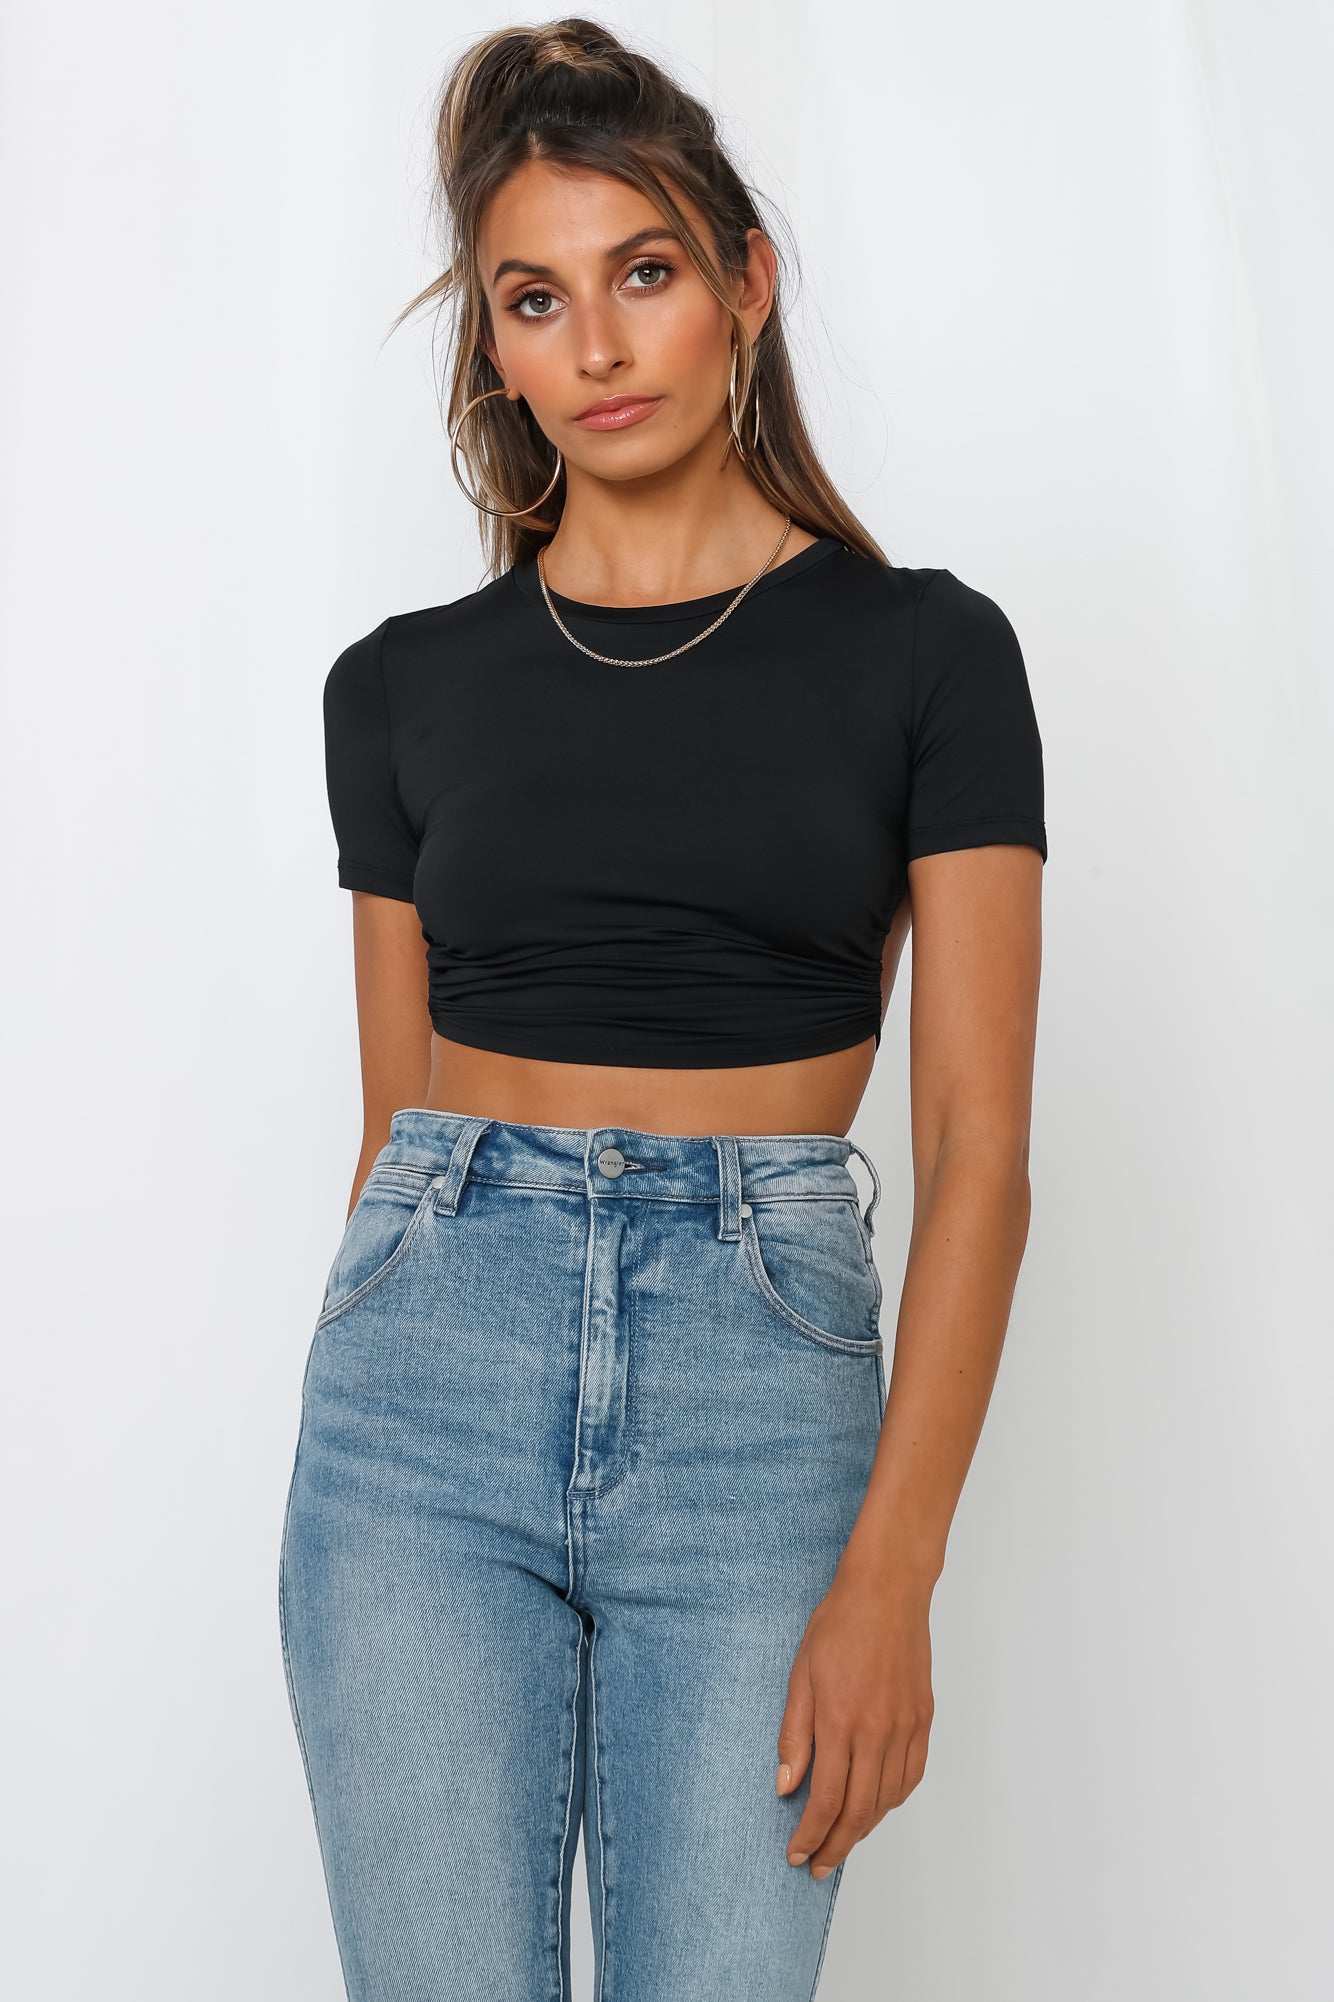 You And No One Else Crop Tee Black